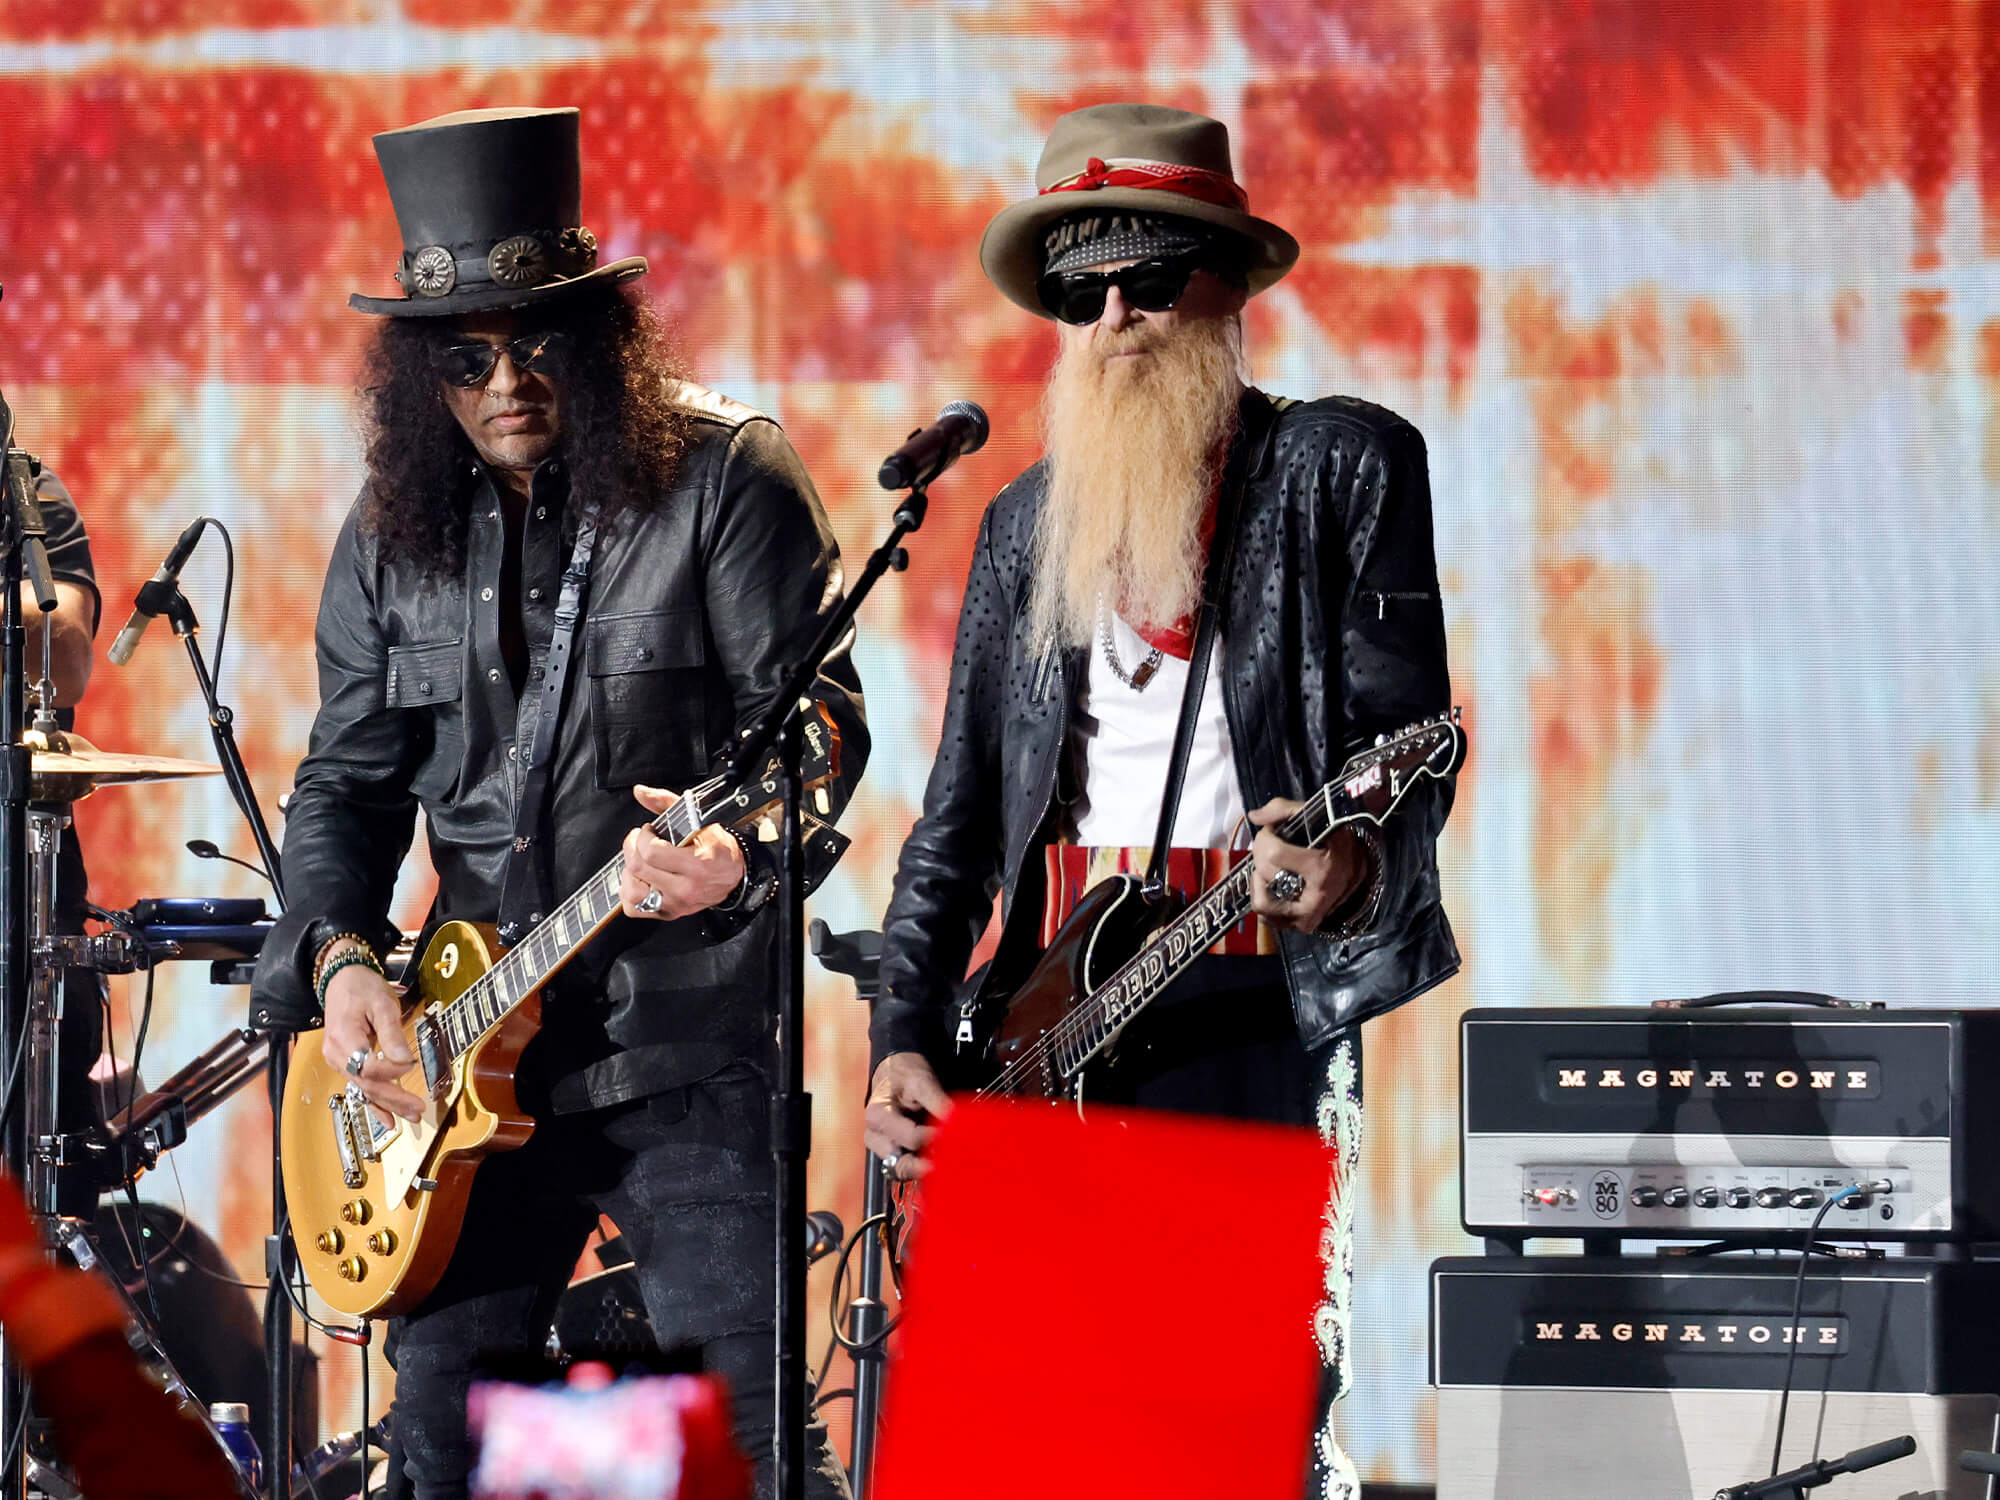 Slash and Billy Gibbons on stage. A Magnatone amp can be seen in the background.